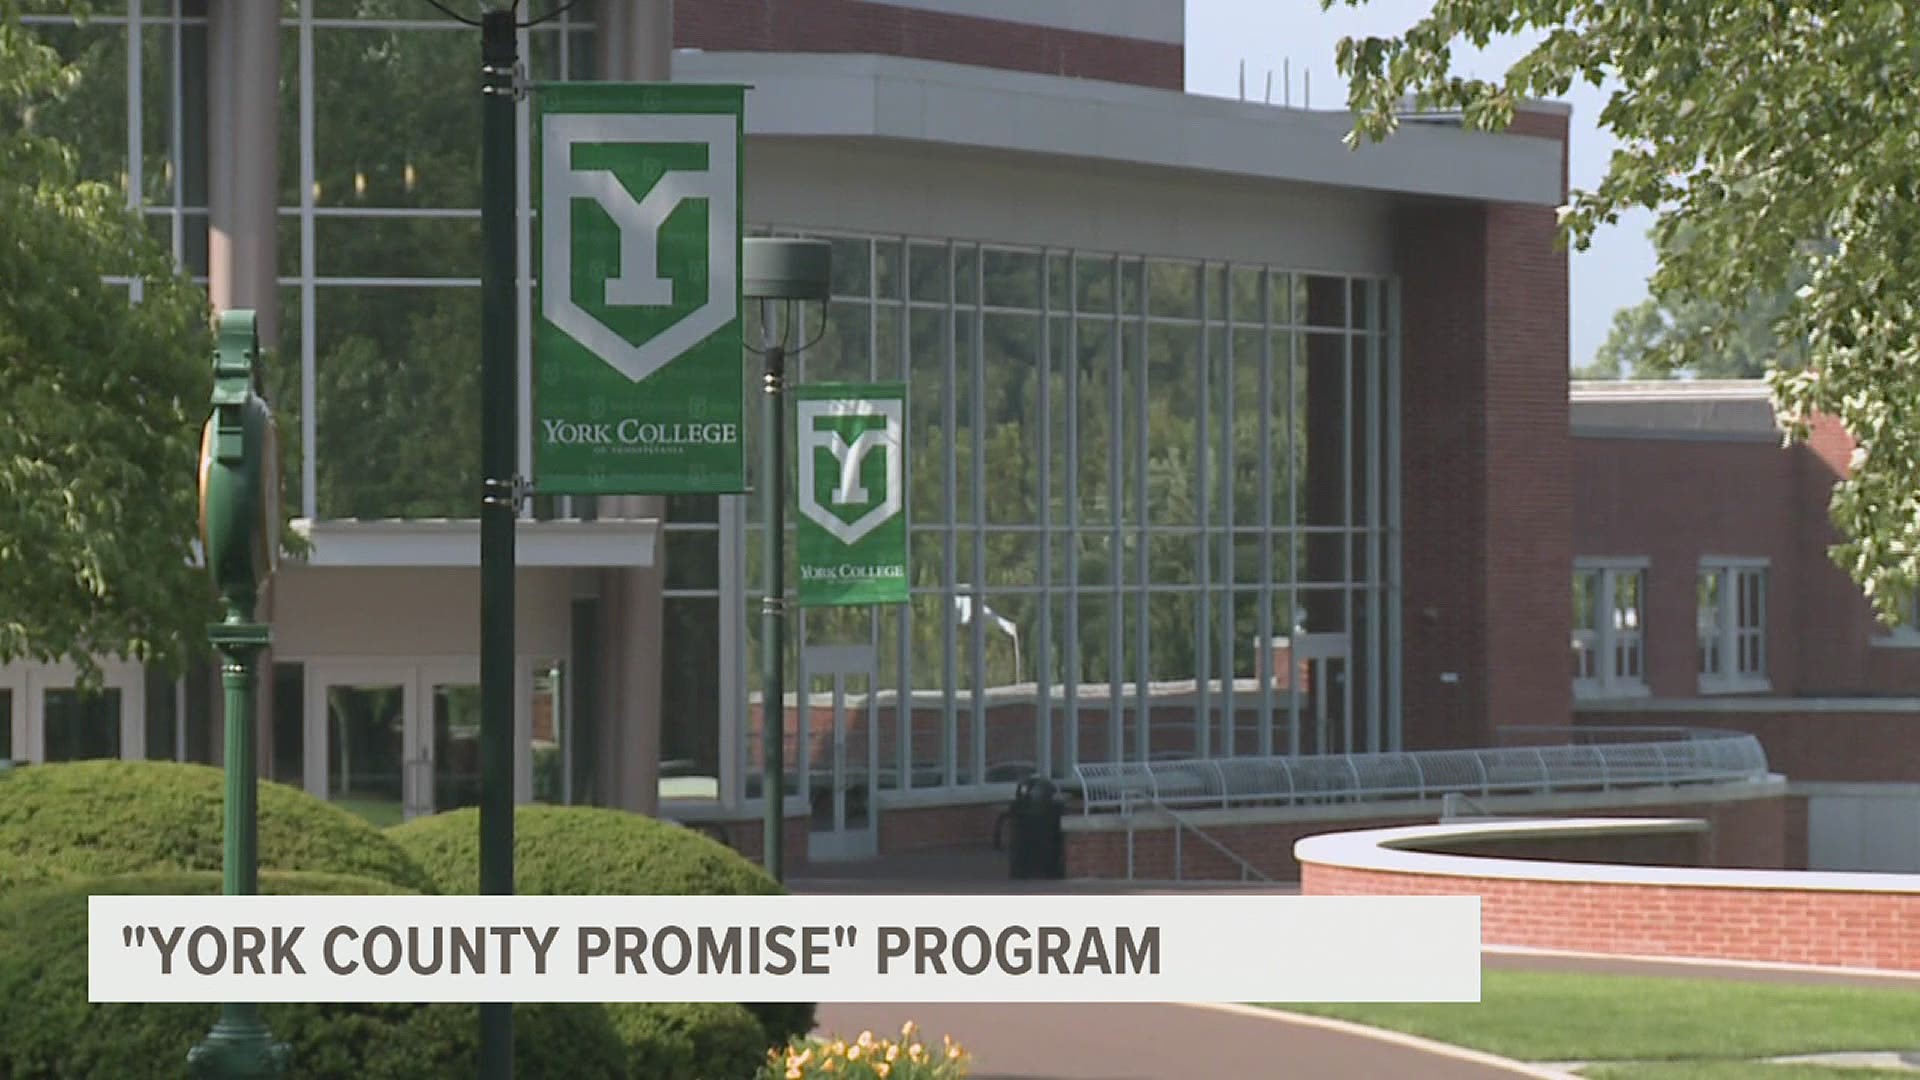 Some students in South Central PA who may not have the means to attend college could have their tuition covered with a new program at York College.